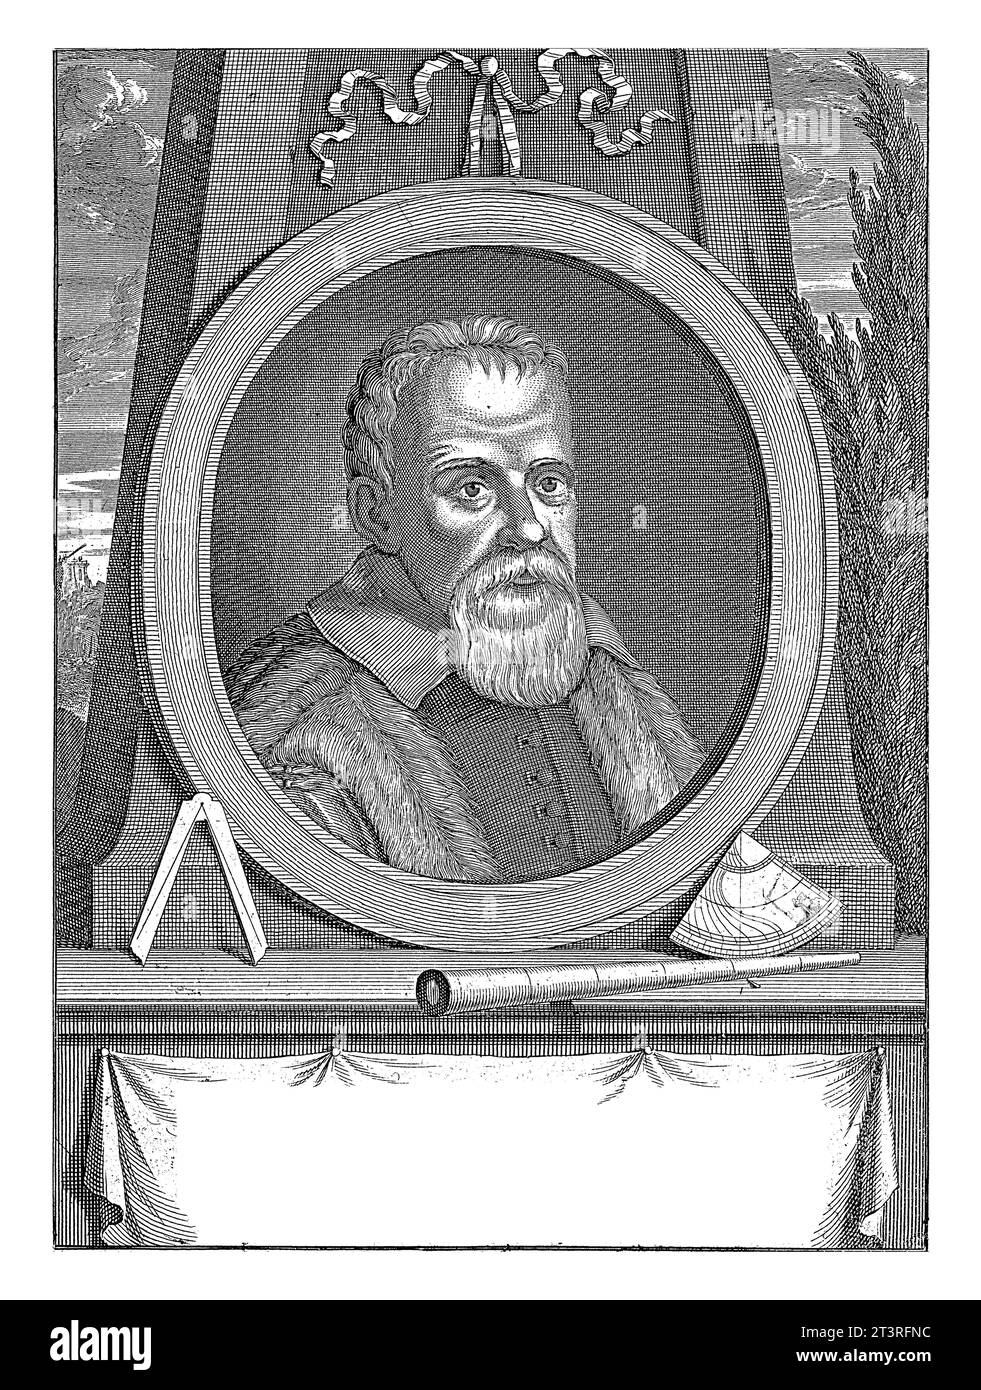 Portrait of Galileo Galilei, Joseph Mulder, 1668 - 1738 Portrait of physicist and astronomer Galileo Galilei. In front of the portrait are a compass a Stock Photo